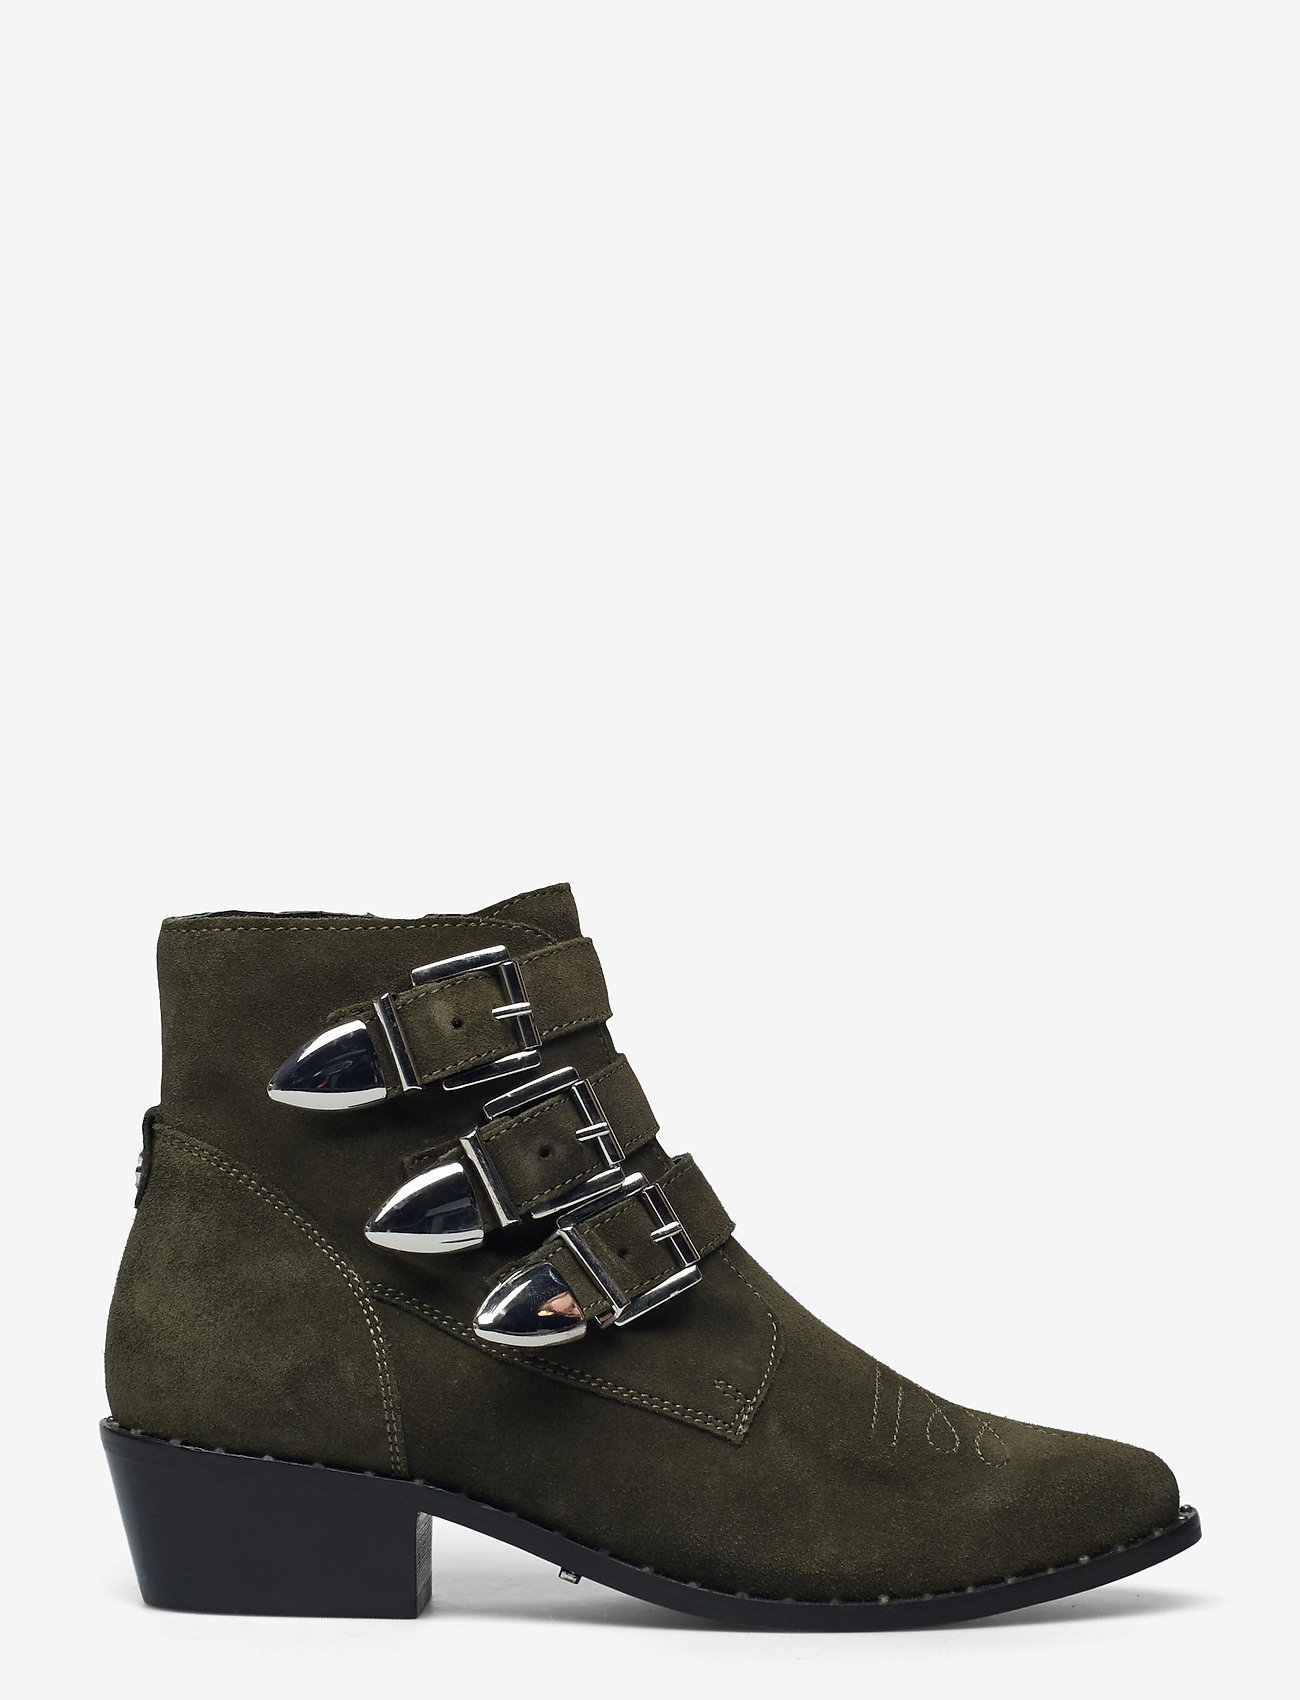 Mexx - Boot - olive - 1